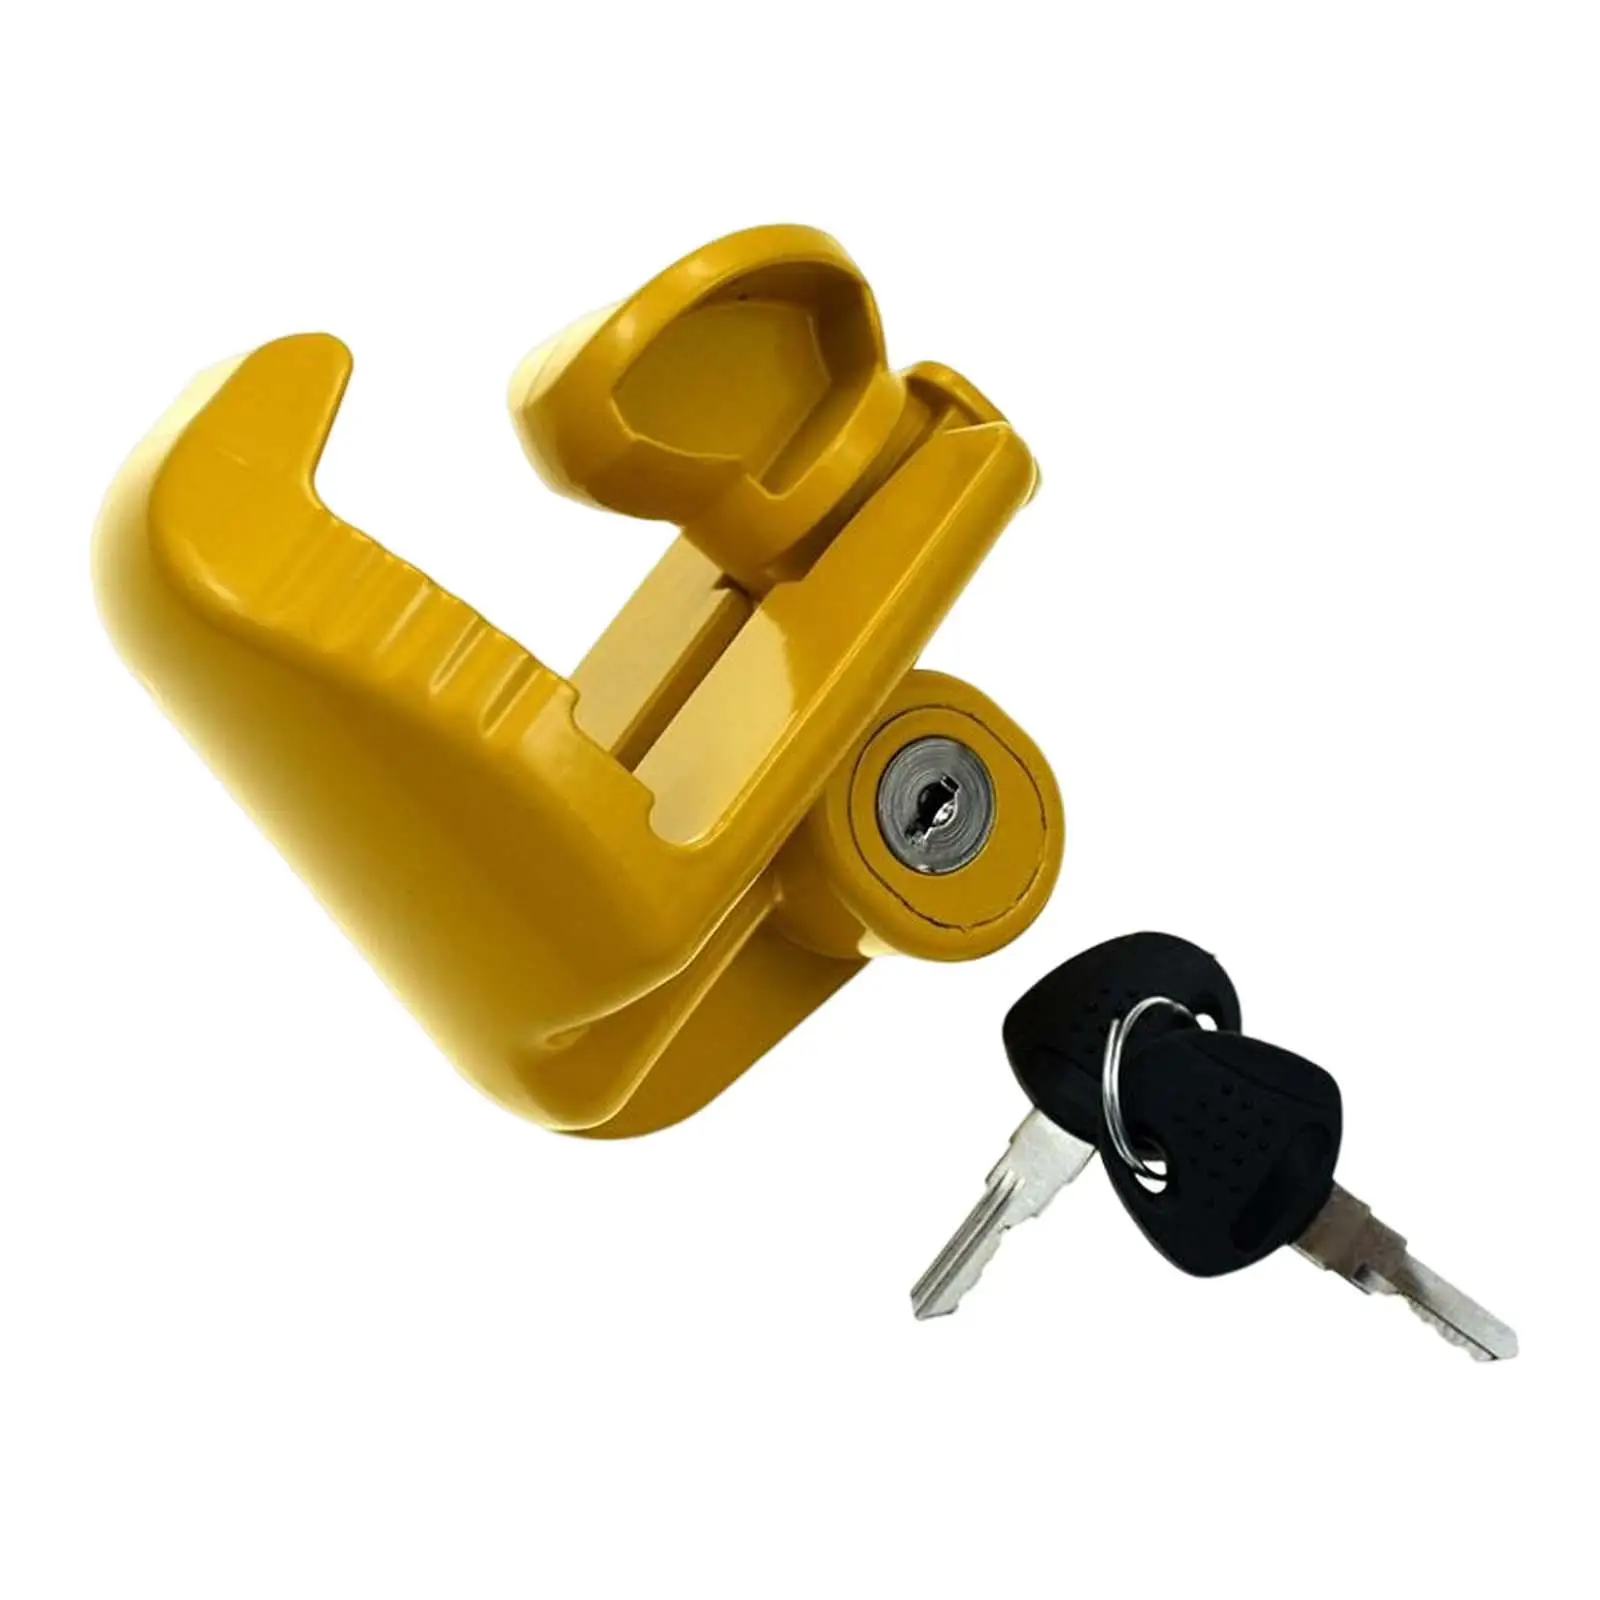 Coupler Lock universal Yellow Adjustable Anti Lock Portable Metal Security Parts Easy to Install